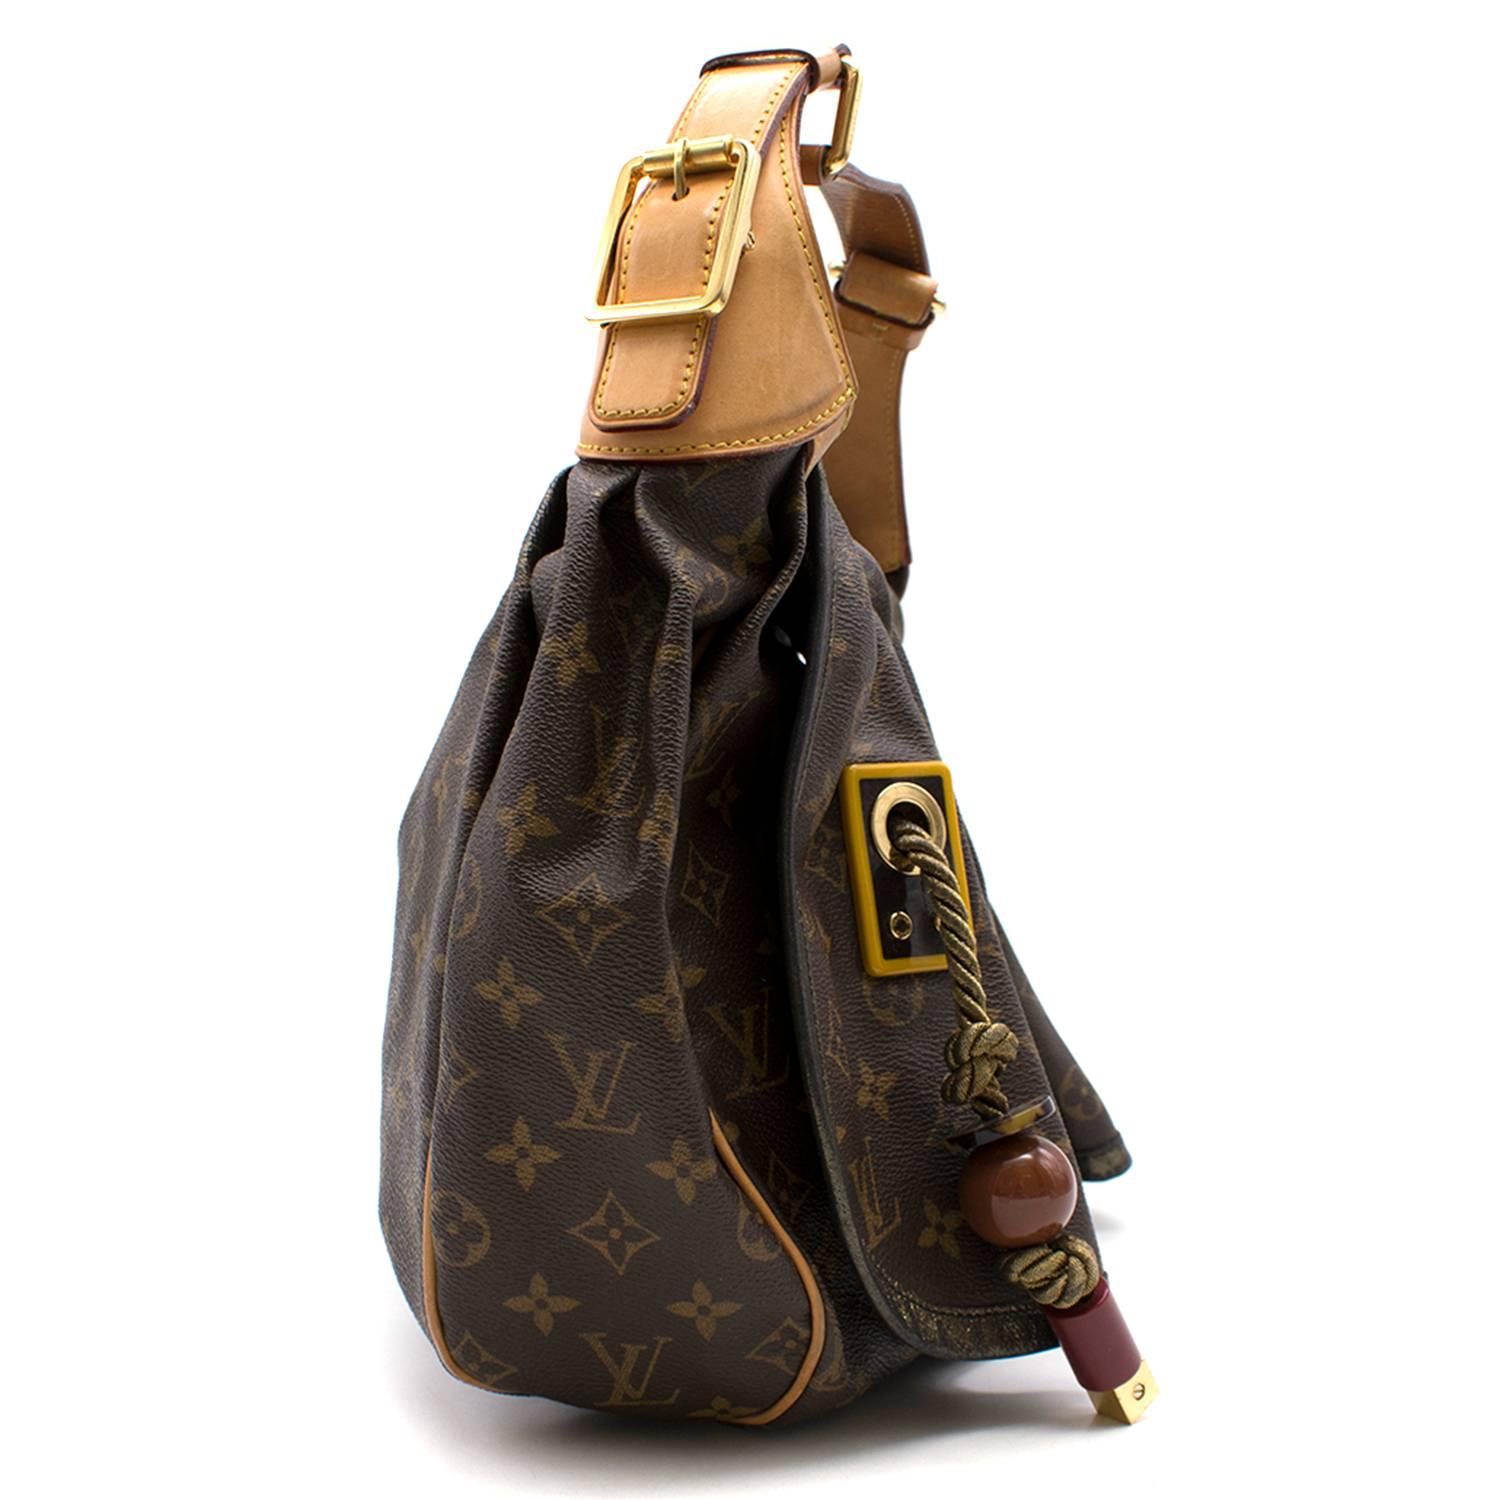 Louis Vuitton canvas bag

- Leather strap
- Rope tassel detailing with large bead details situated at the front of the bag
- Gold coloured metal hardware on the tassels and on the strap.
- Interior lined with suede and two interior slip